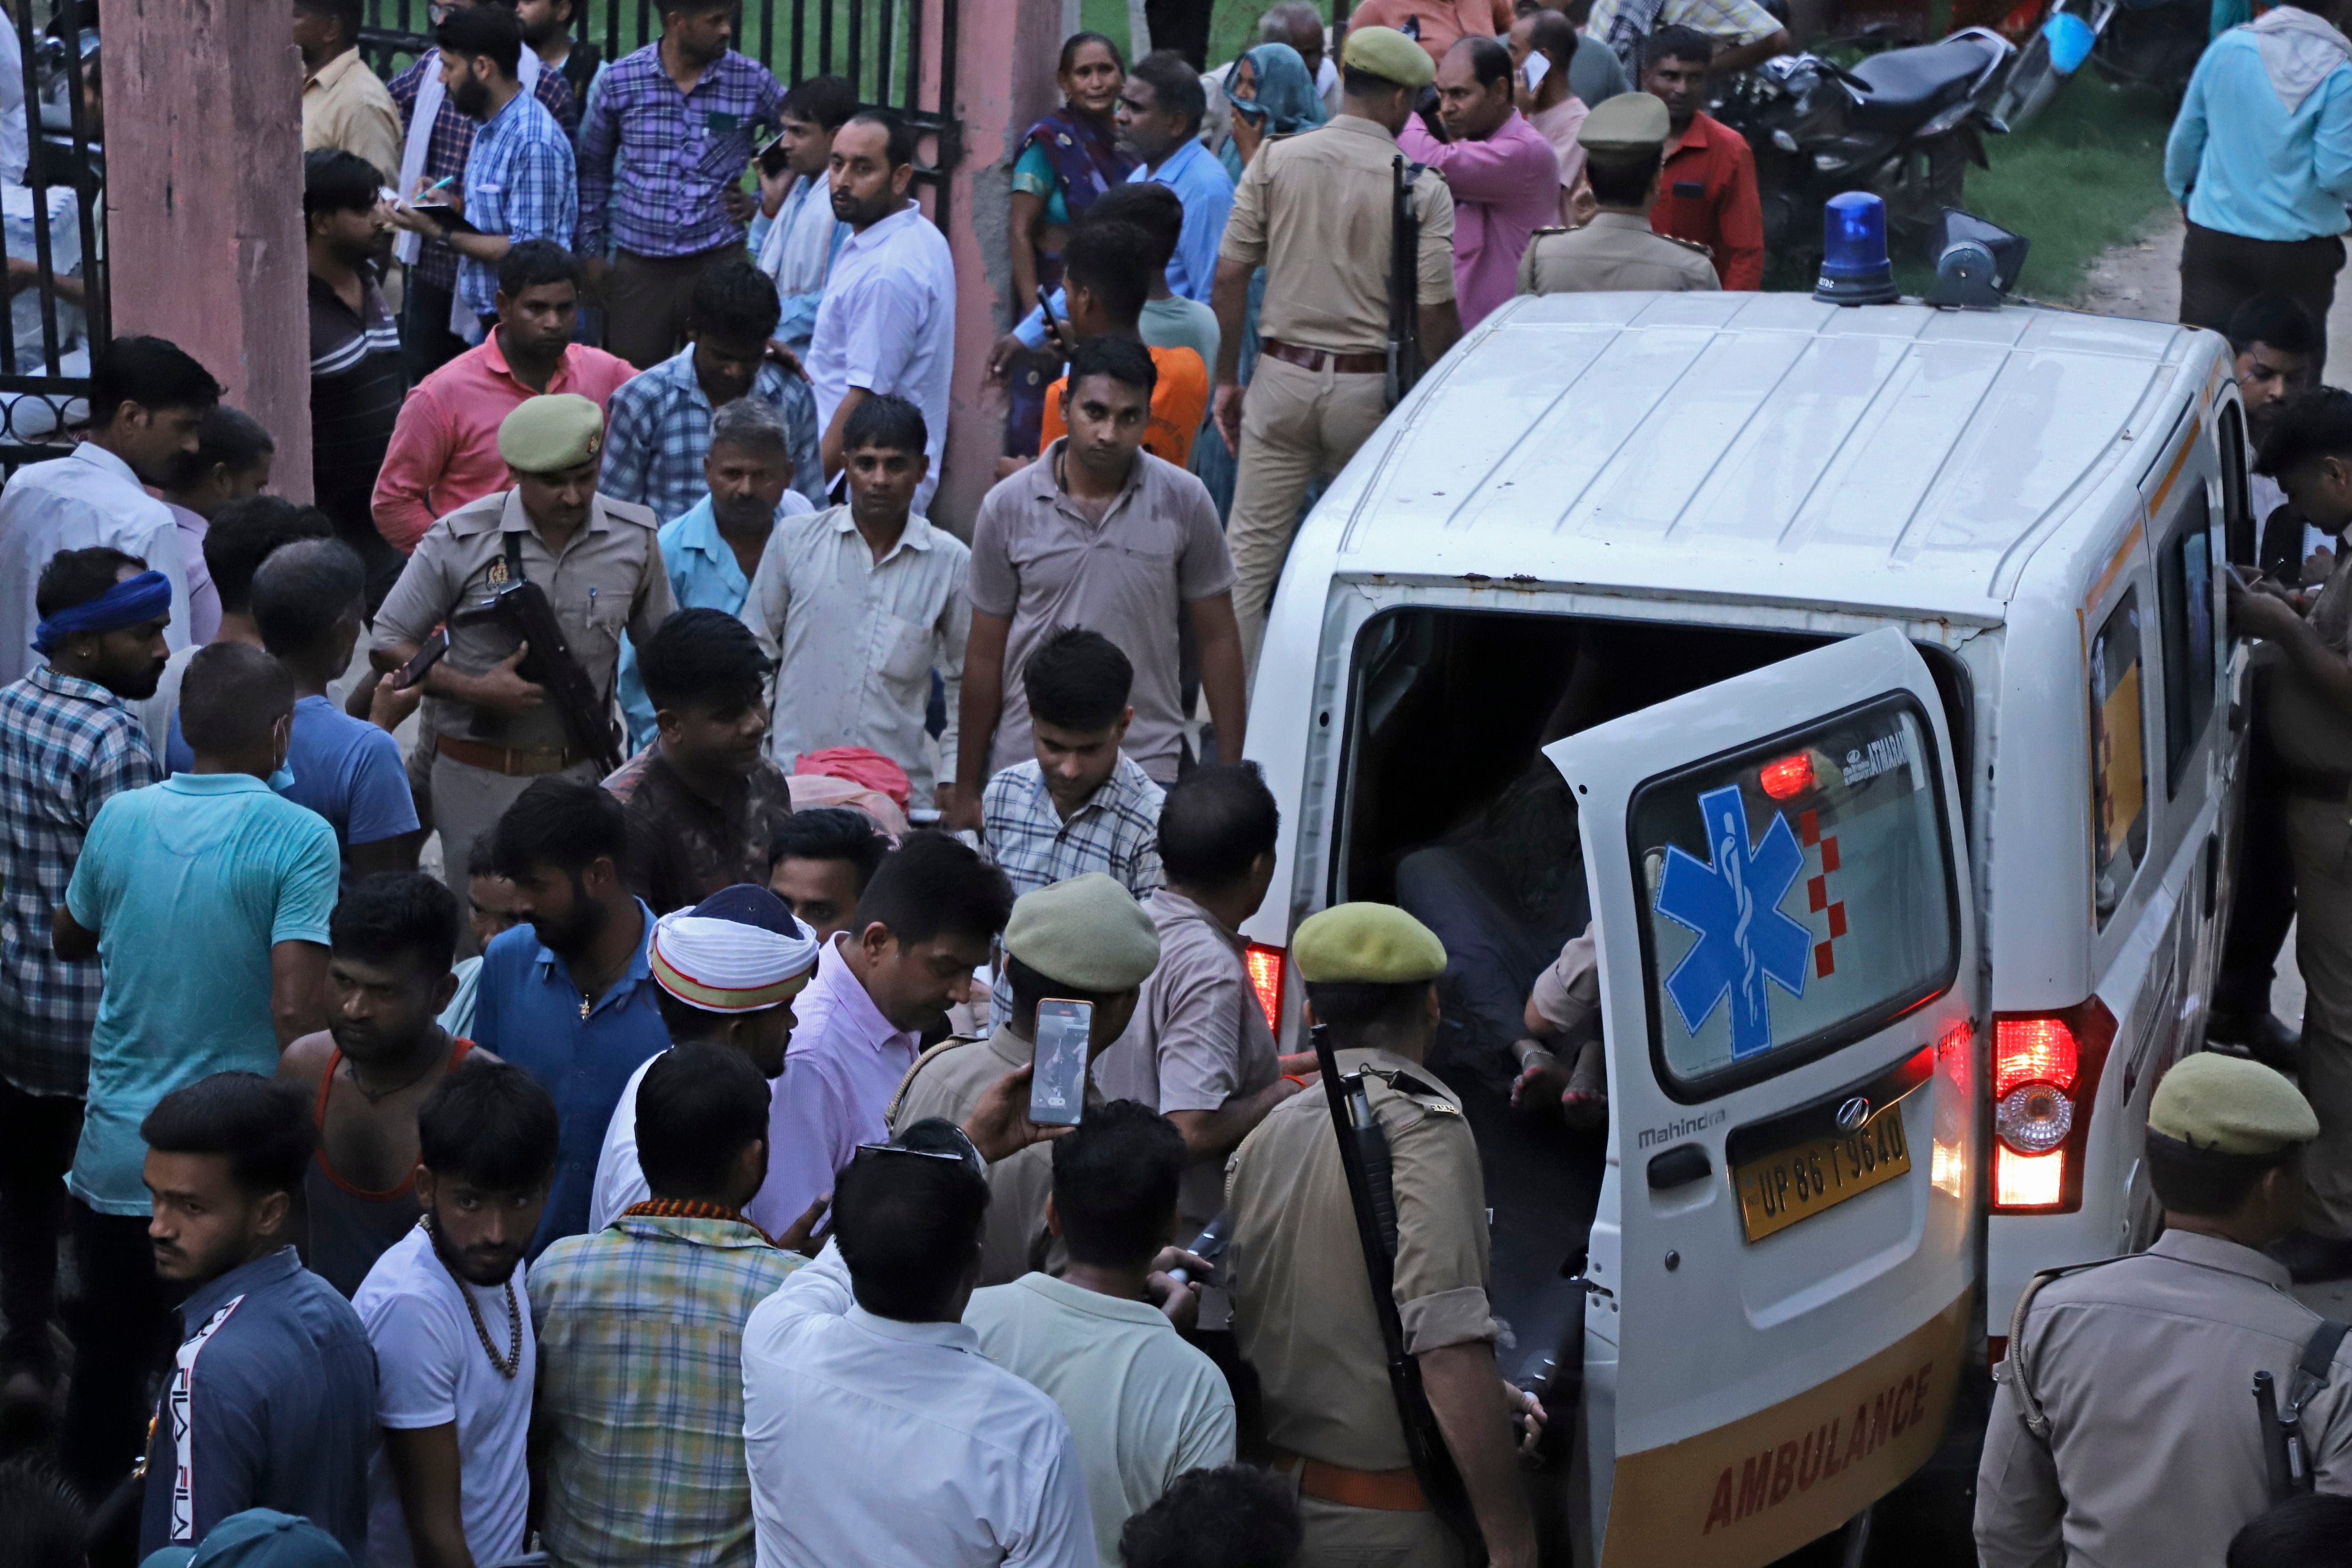 How did a religious gathering in India turn into a deadly stampede? thumbnail